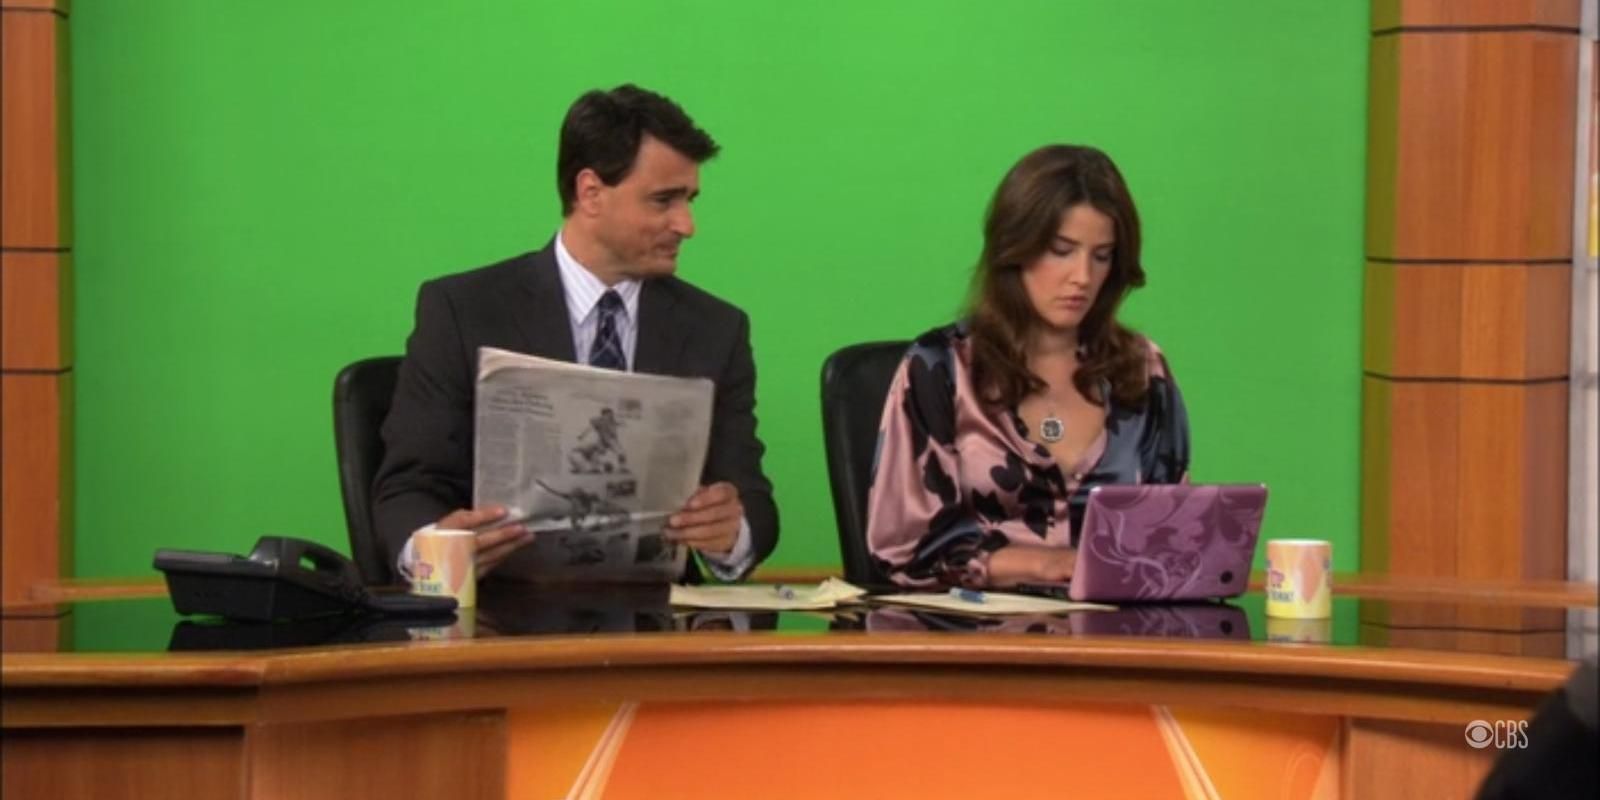 Don and Robin preparing to go on the air in How I Met Your Mother